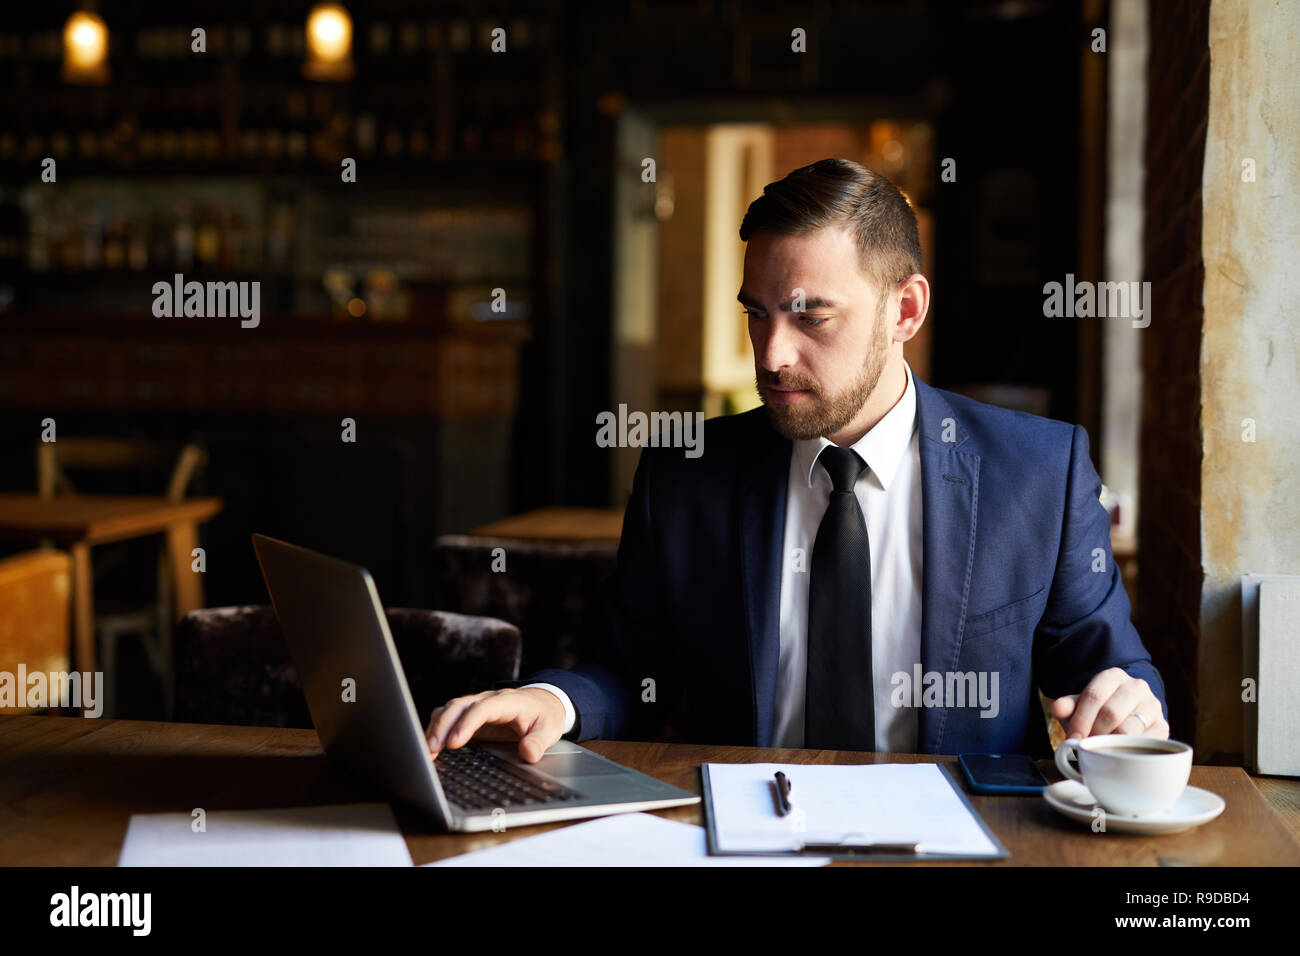 Busy man using laptop in cafe Stock Photo